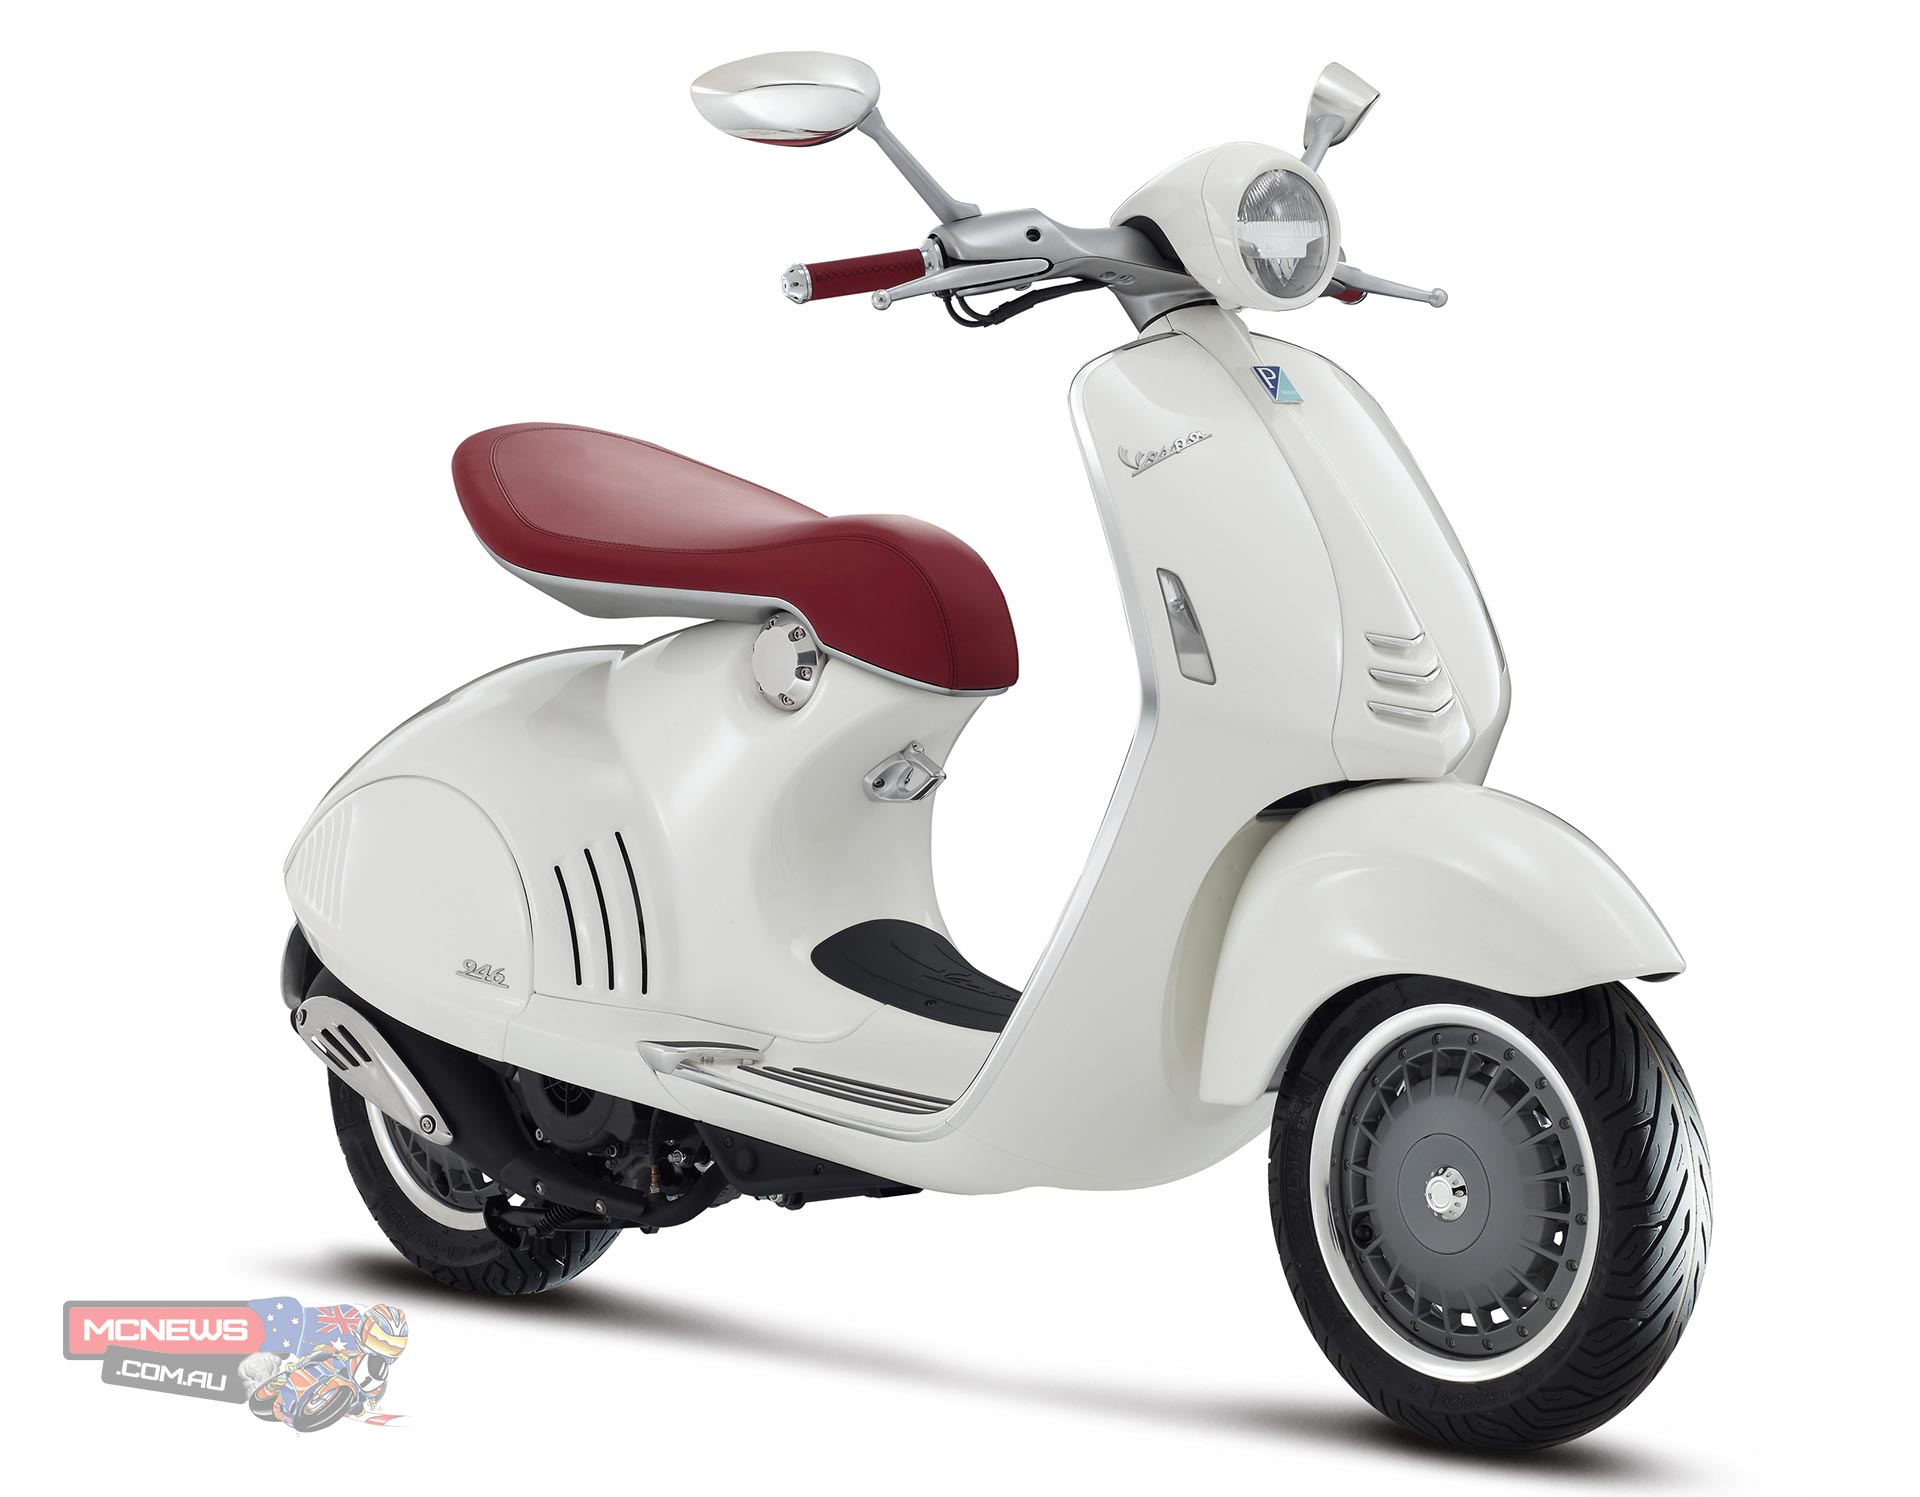 Vespa 946 Christian Dior 2023 Images - Check out design & styling